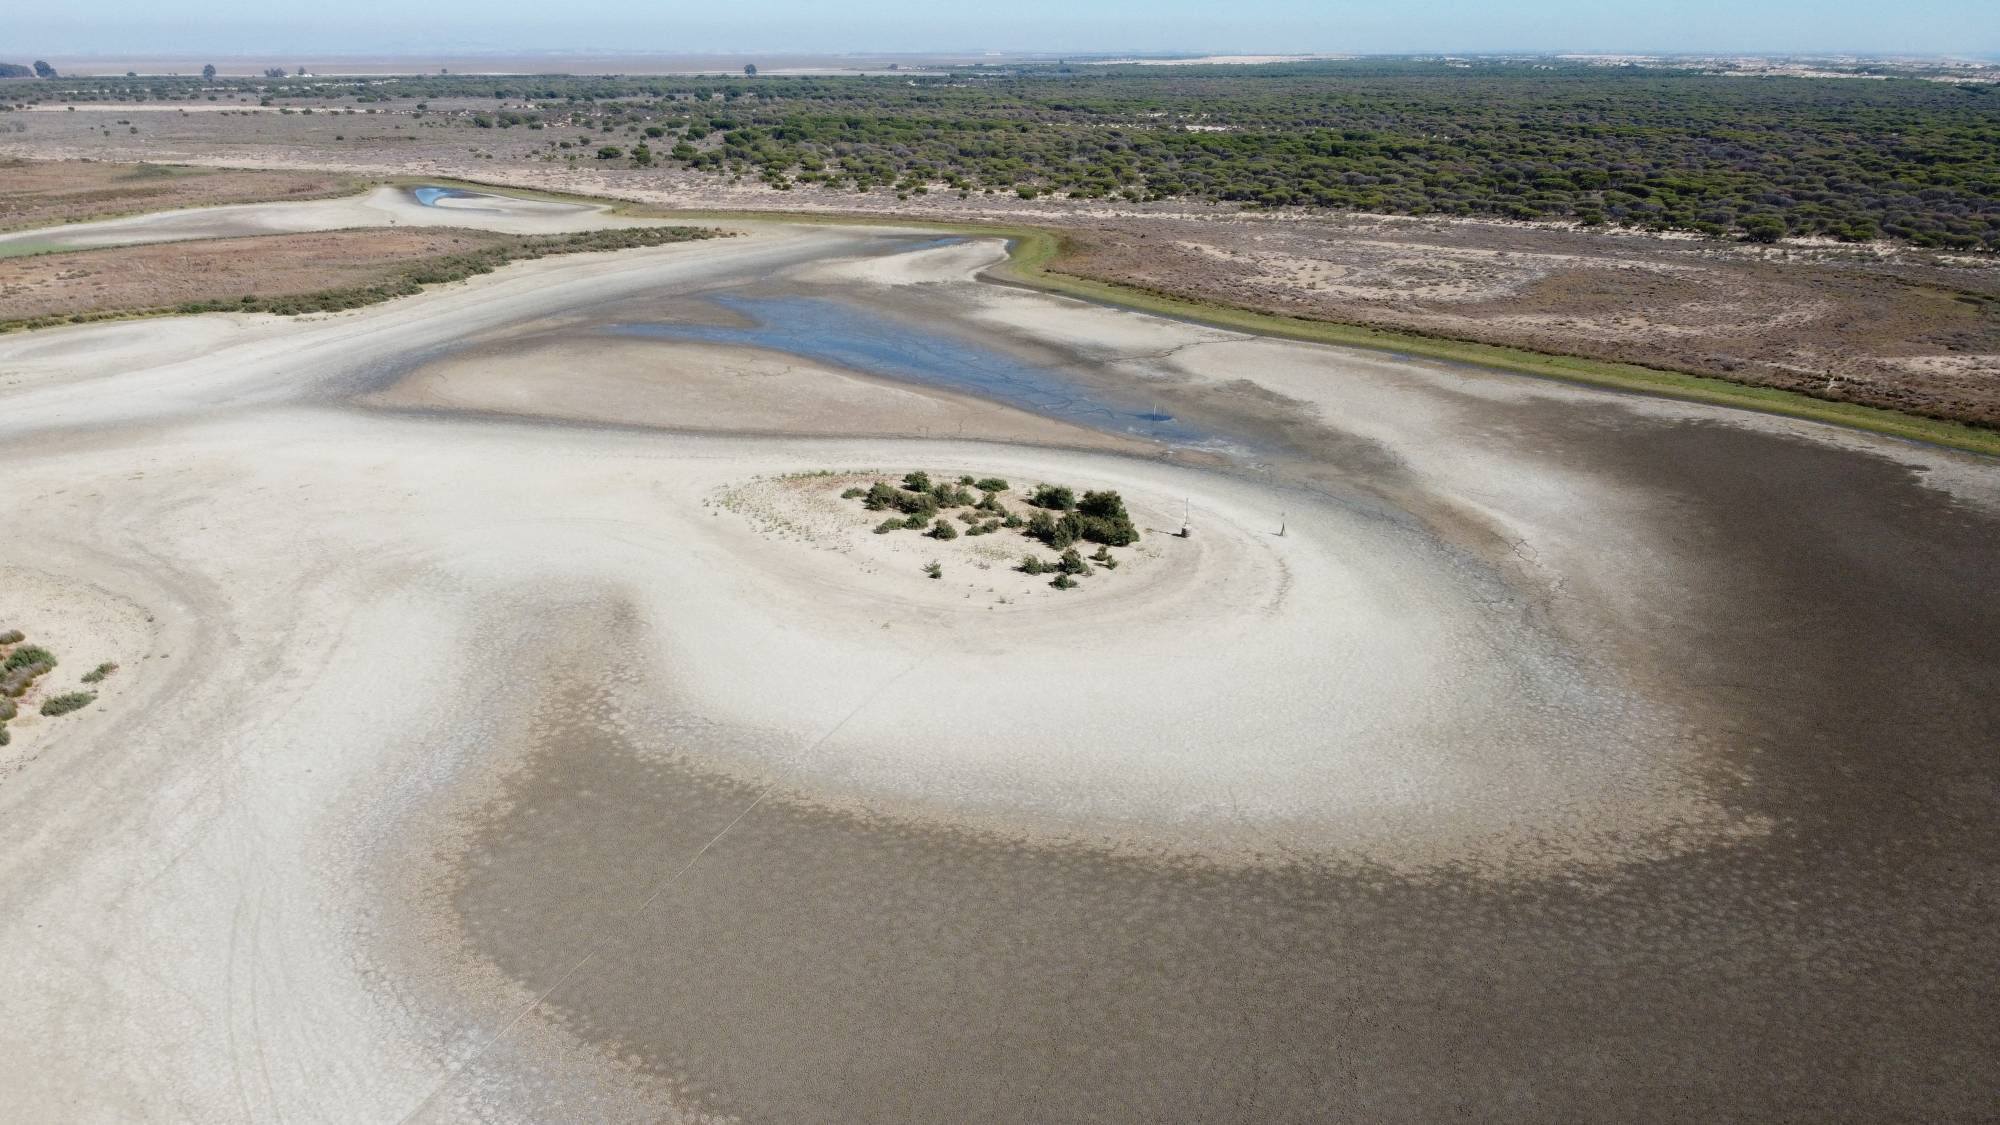 The lagoon of Santa Olalla, dried out at Donana National Park in southern Spain in August 2022 | EBD-CSIC / VIA REUTERS